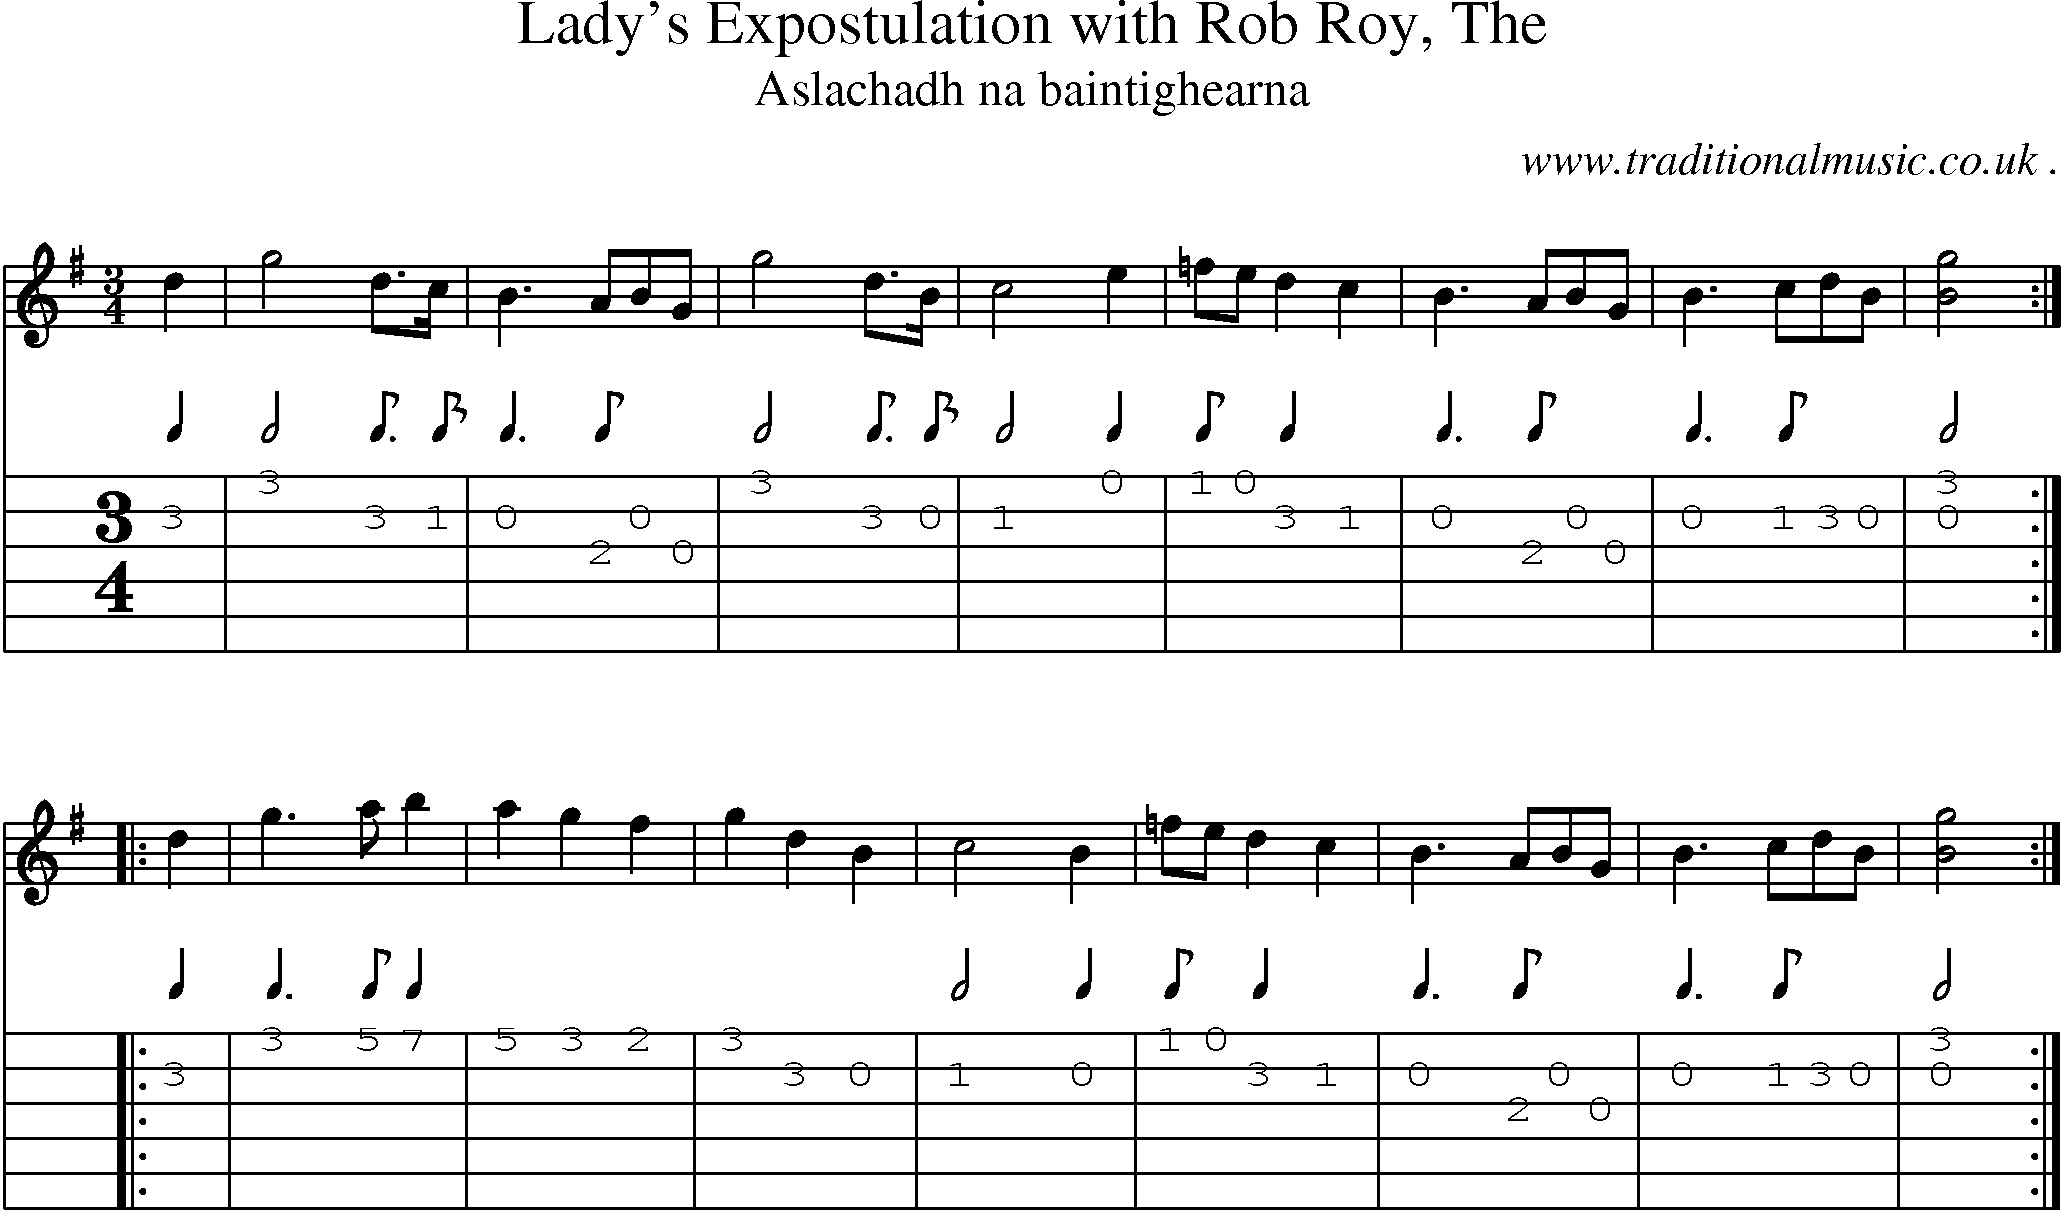 Sheet-music  score, Chords and Guitar Tabs for Ladys Expostulation With Rob Roy The